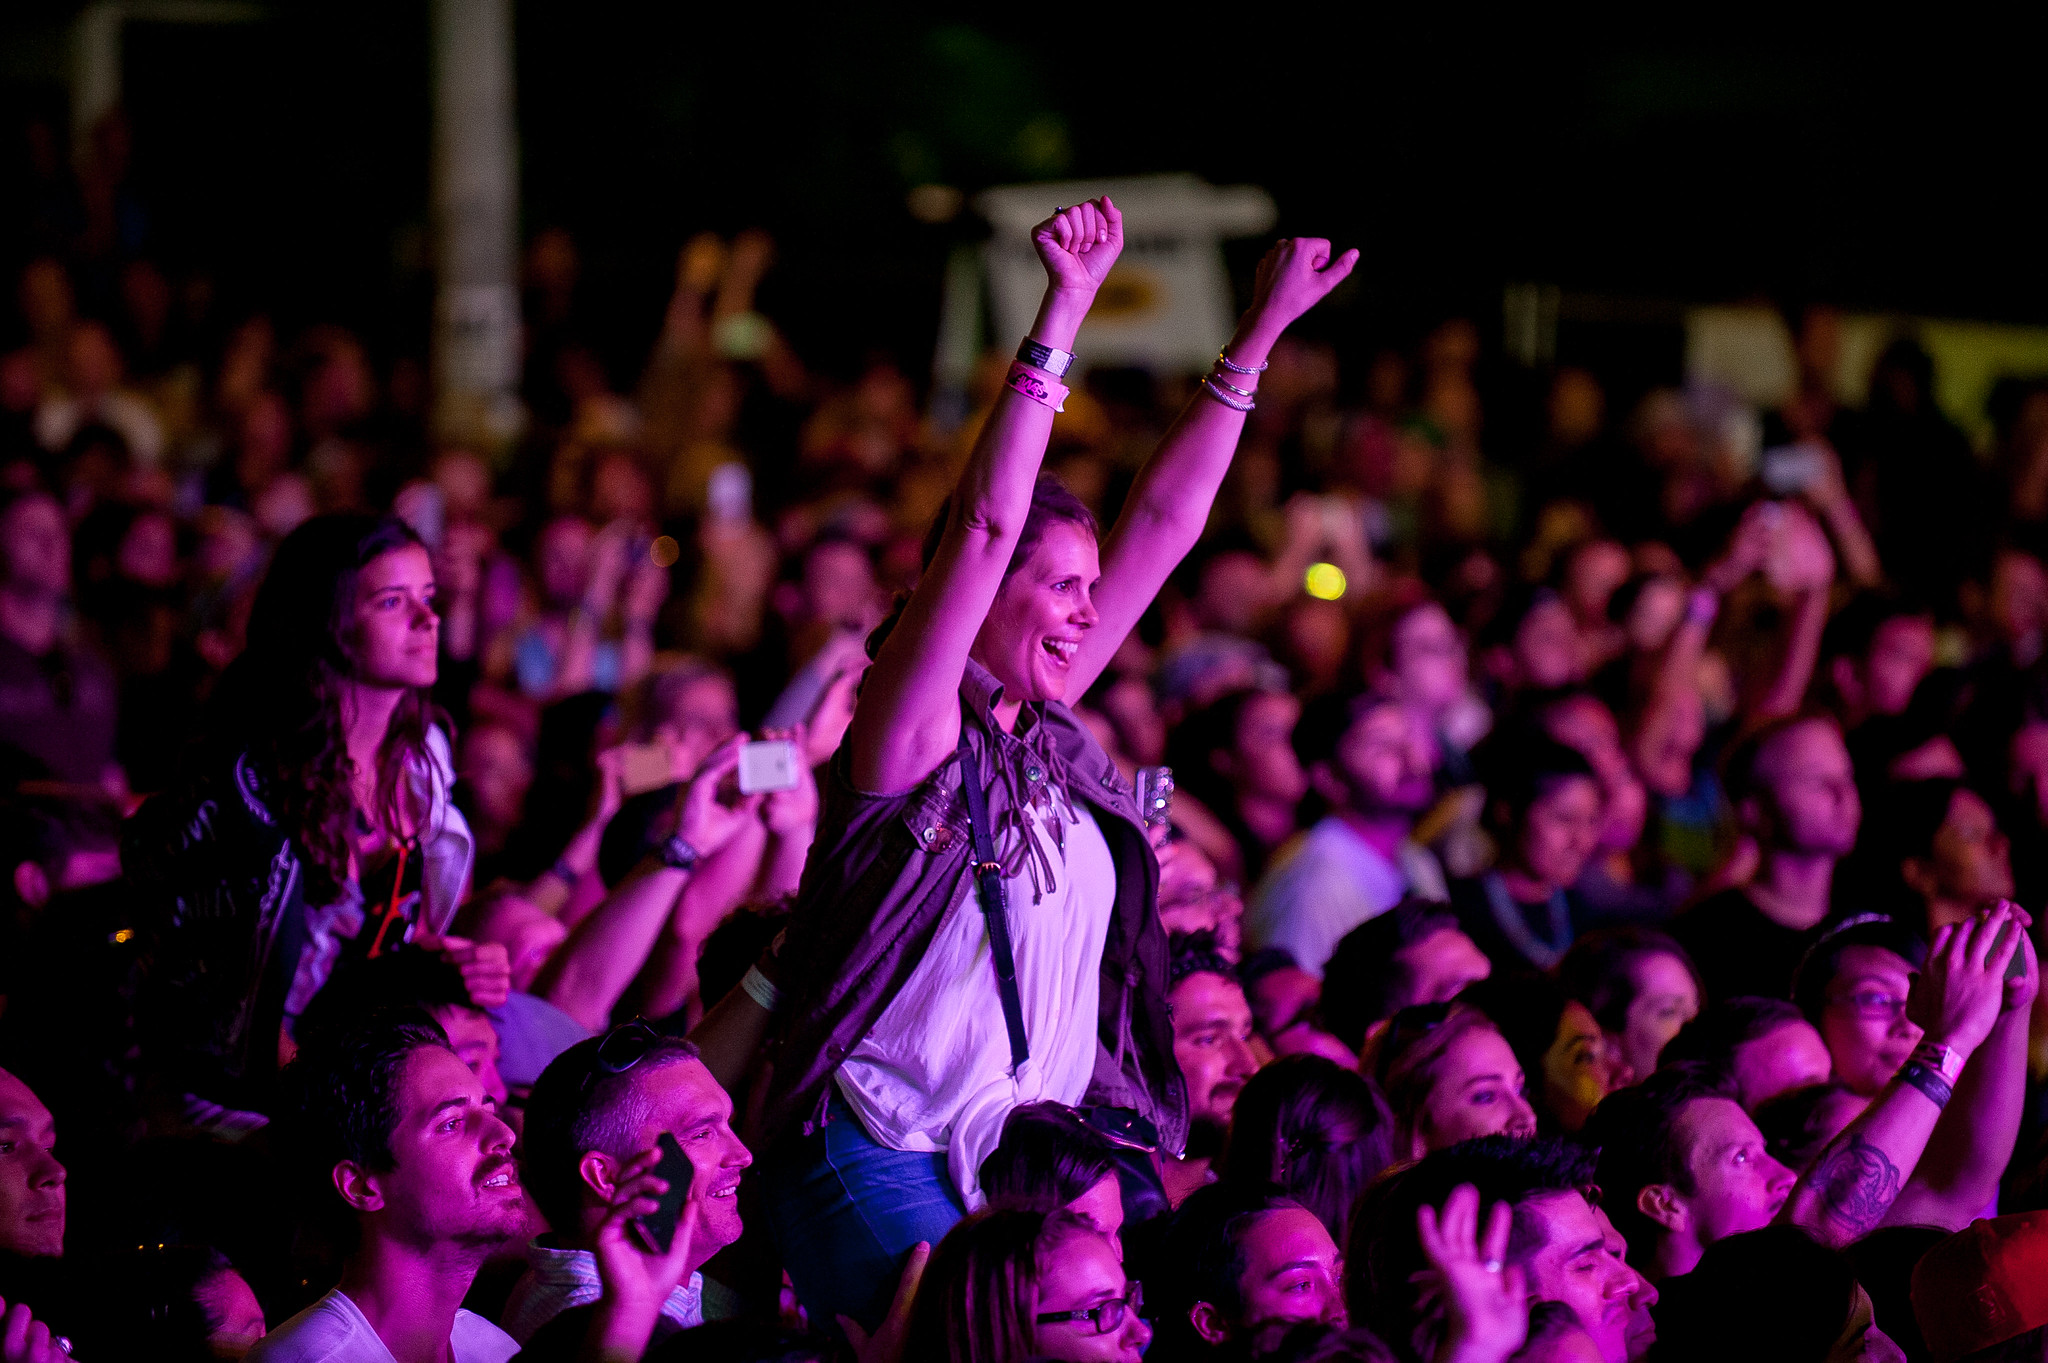 crowd cheers at a music festival at night